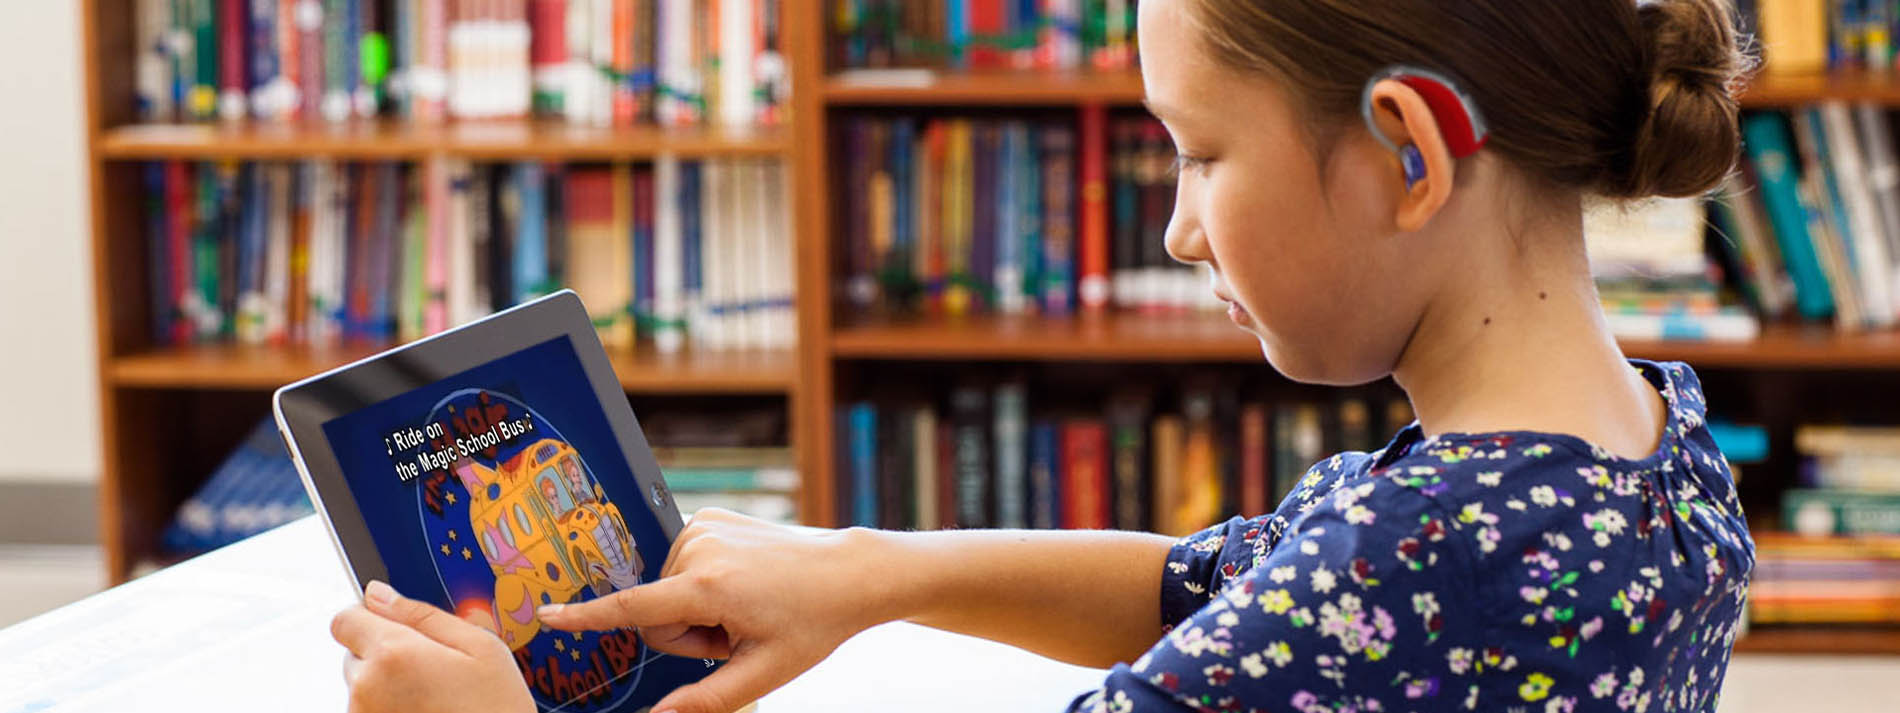 A young girl wearing a hearing aid sits at a tablet watching a captioned video on a tablet. Shelves of books are in the background.